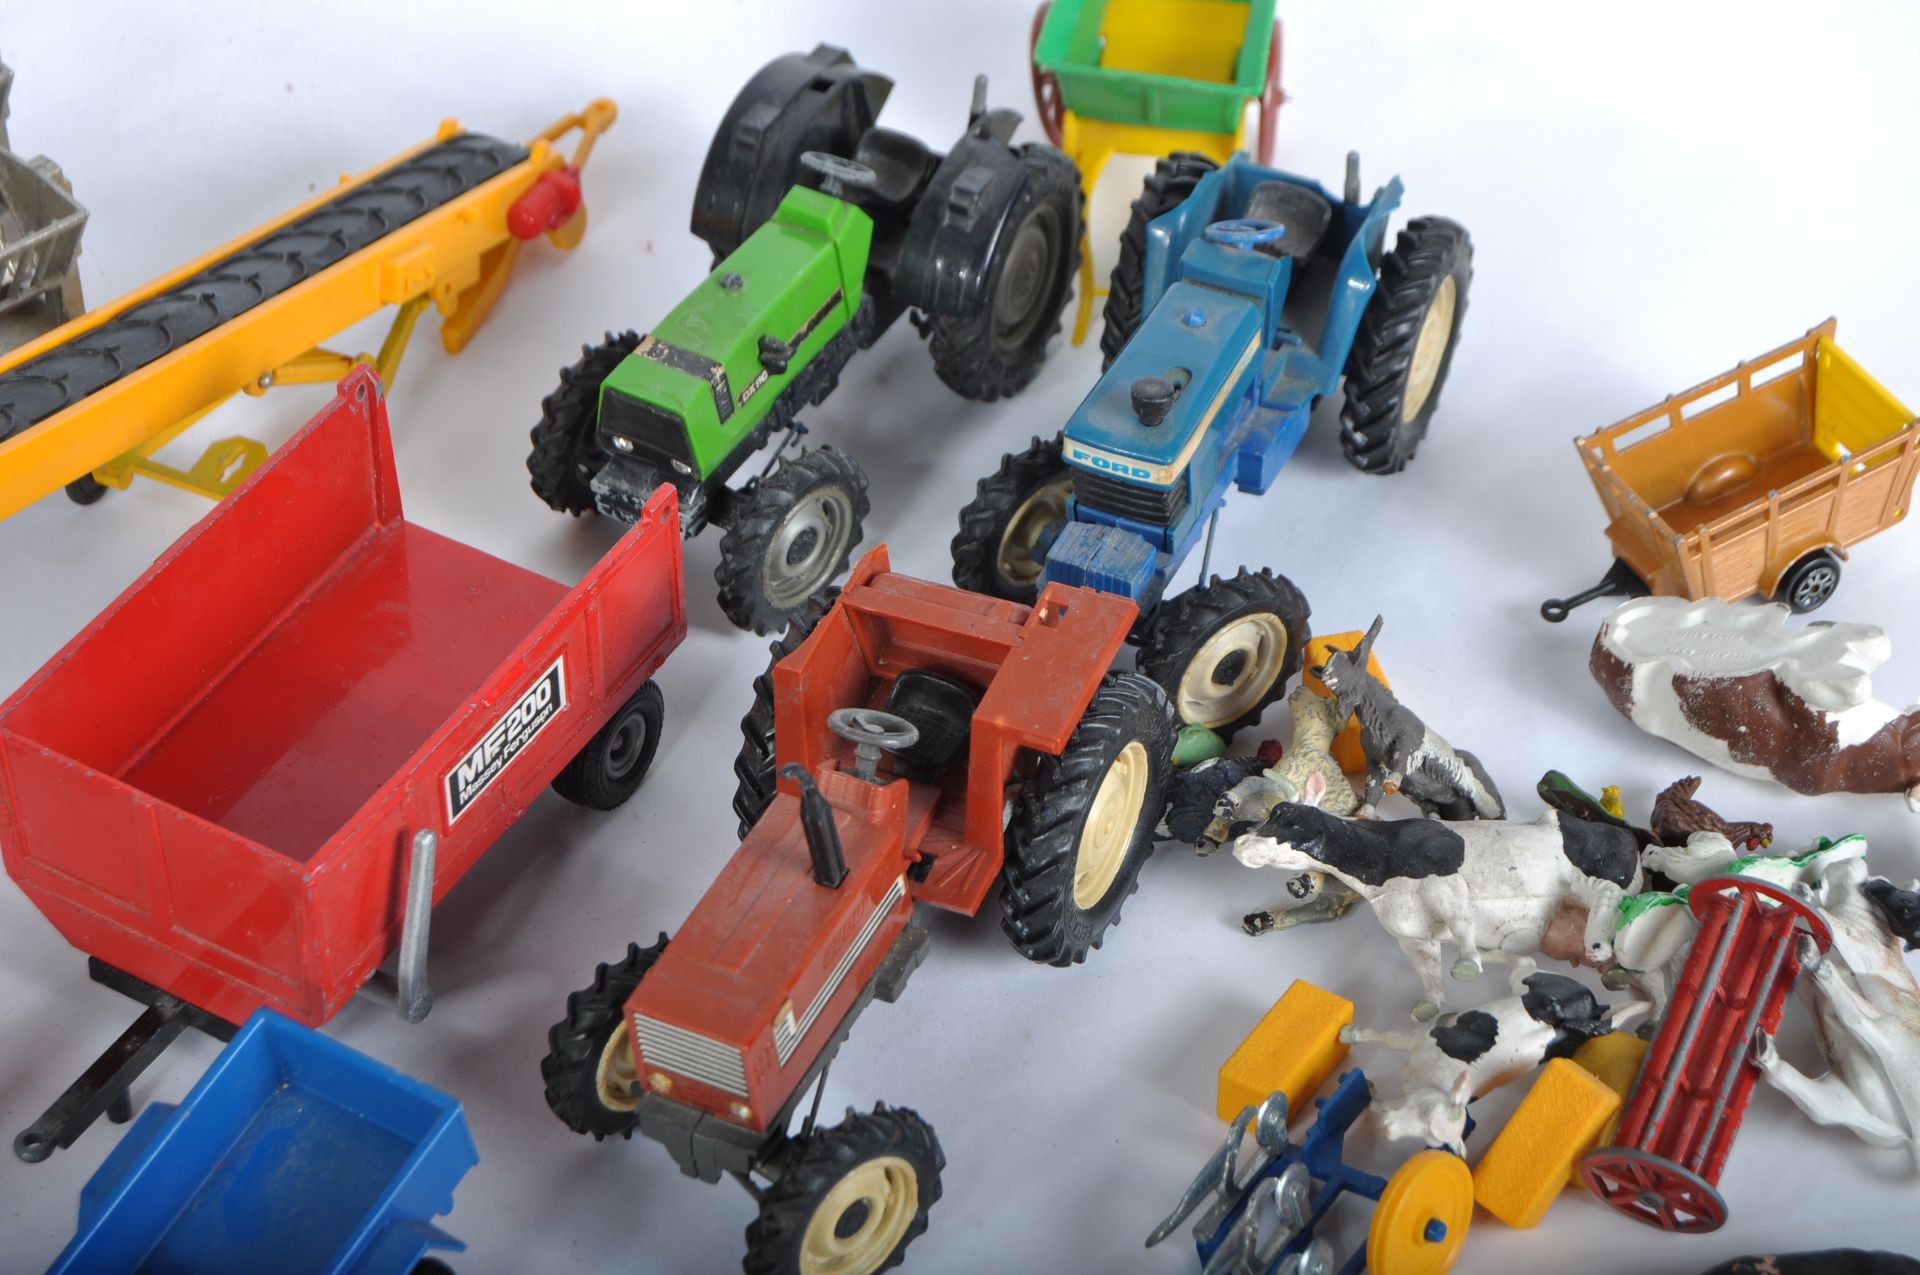 COLLECTION OF VINTAGE BRITAINS FARM ANIMALS & CONSTRUCTION MACHINES - Image 7 of 8